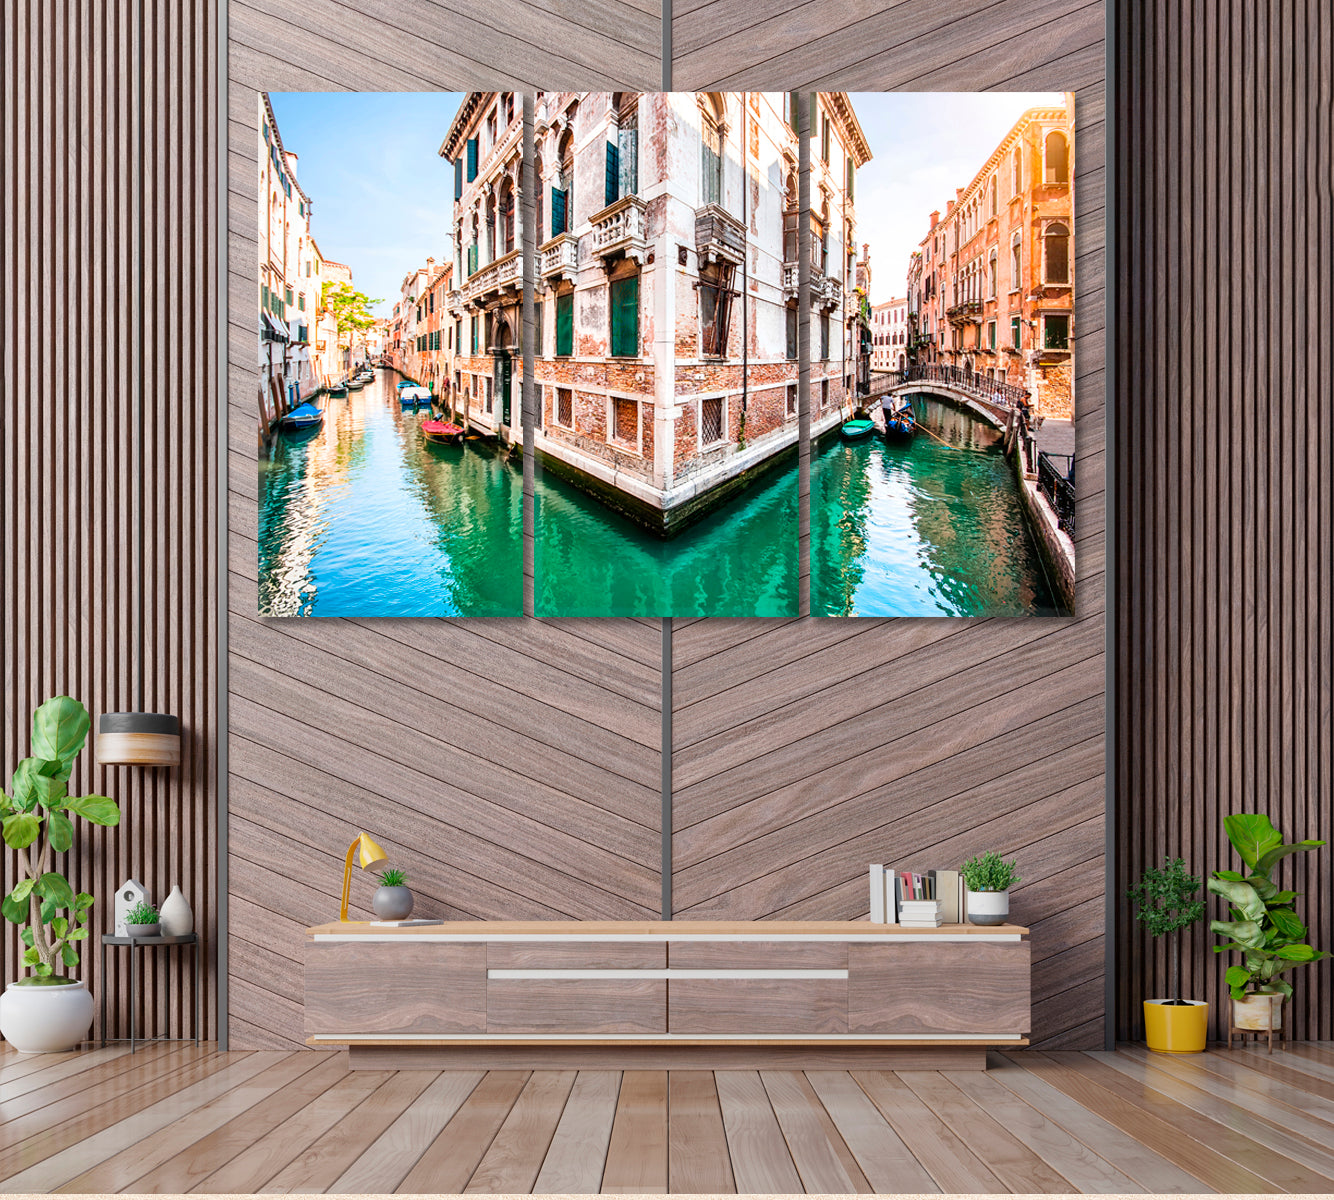 Grand Canal Venice Canvas Print ArtLexy 3 Panels 36"x24" inches 